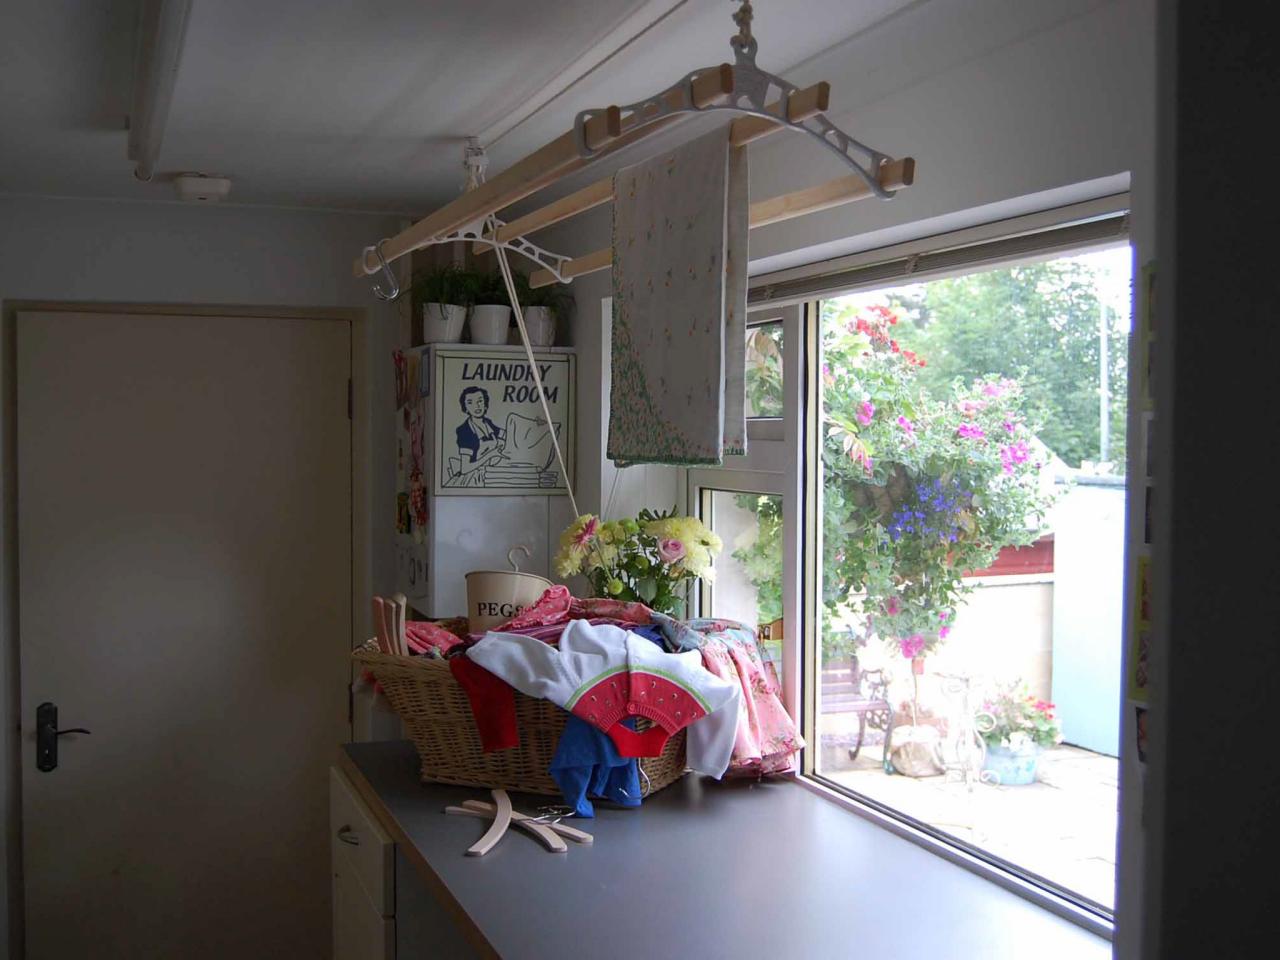 Small Laundry Room Storage Ideas: Pictures, Options, Tips ...